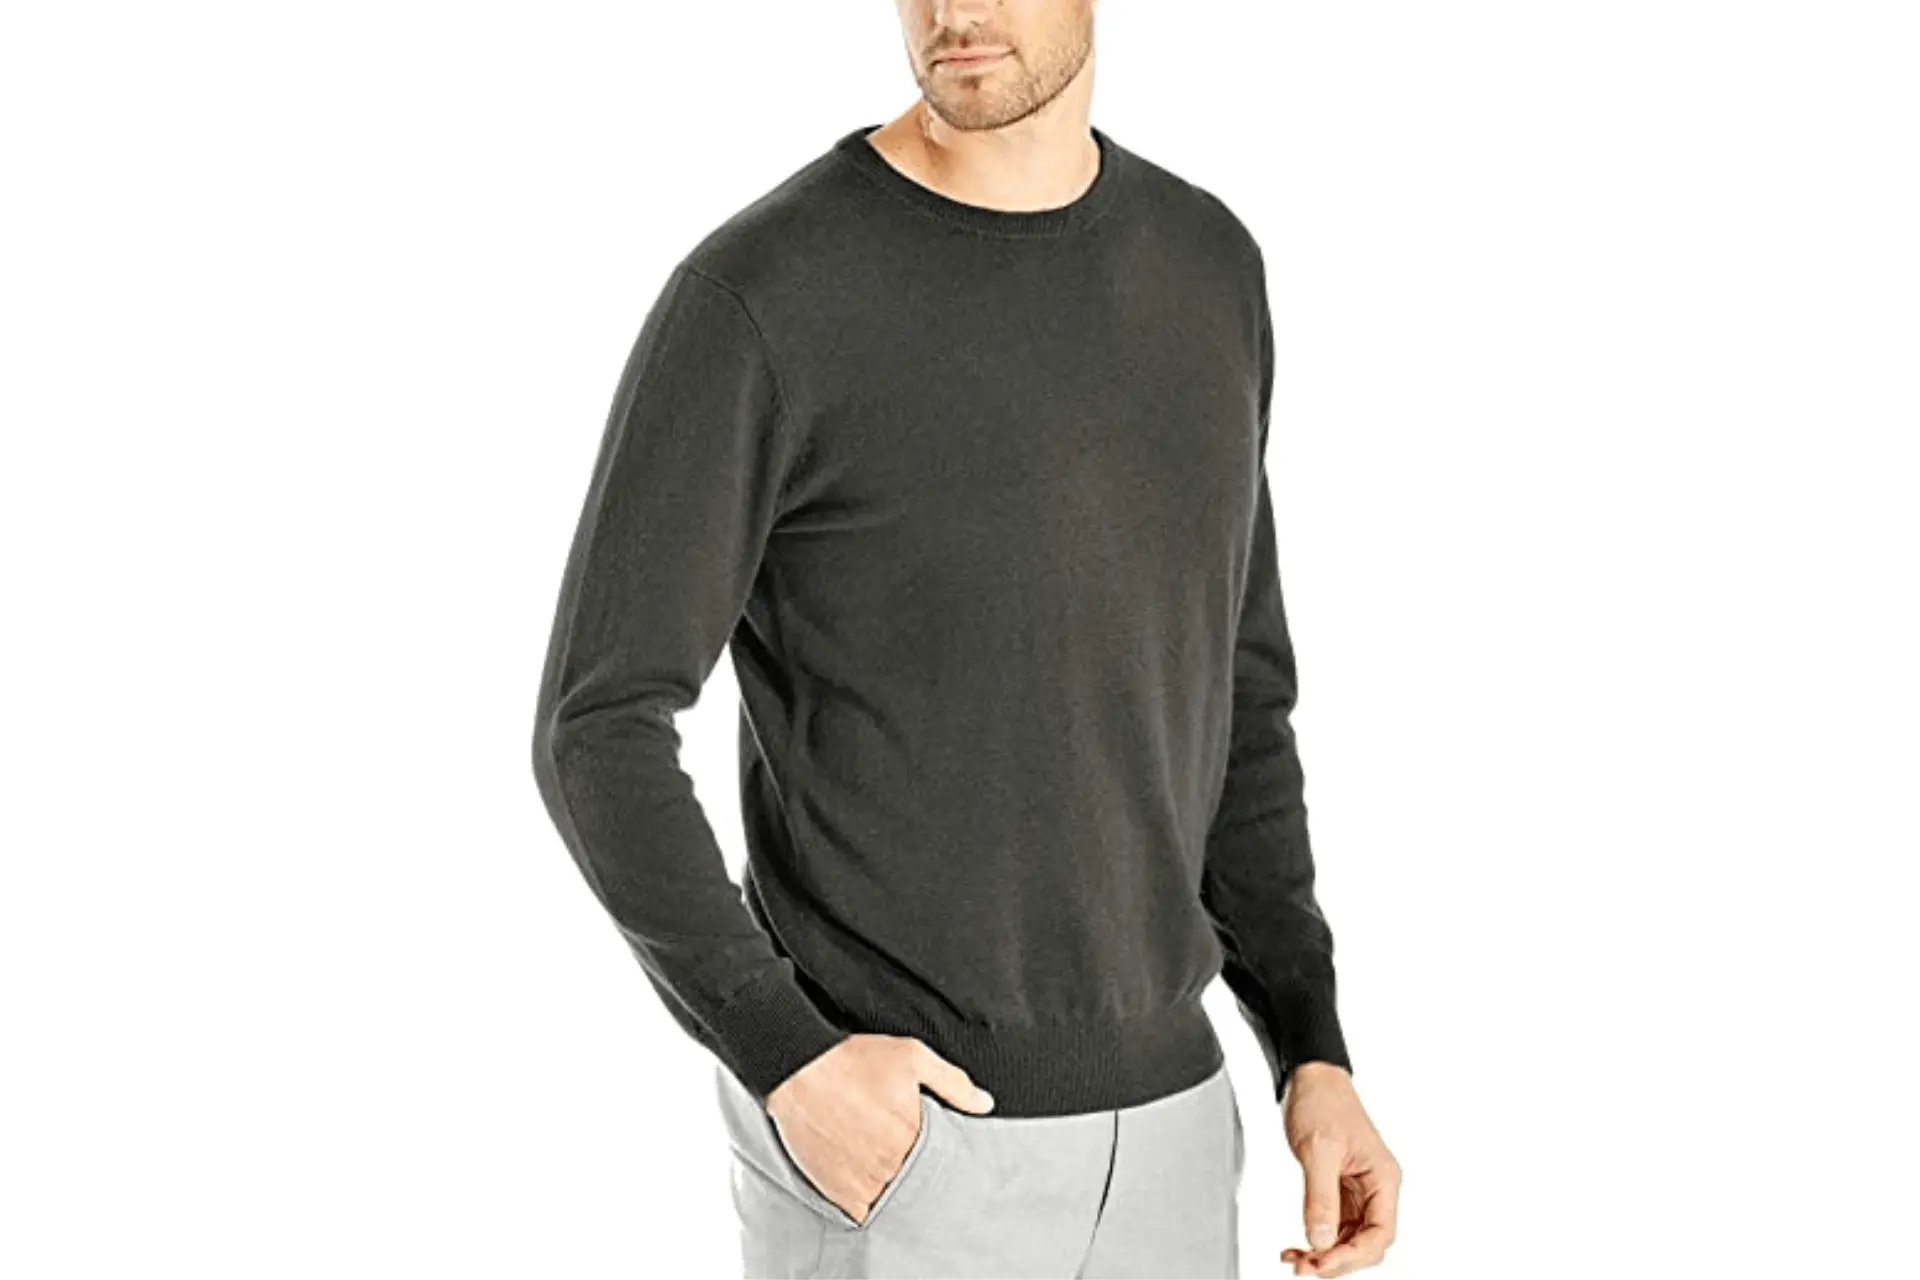 Cashmere Boutique: Cashmere Long Sleeves Crew Neck Pullover Sweater